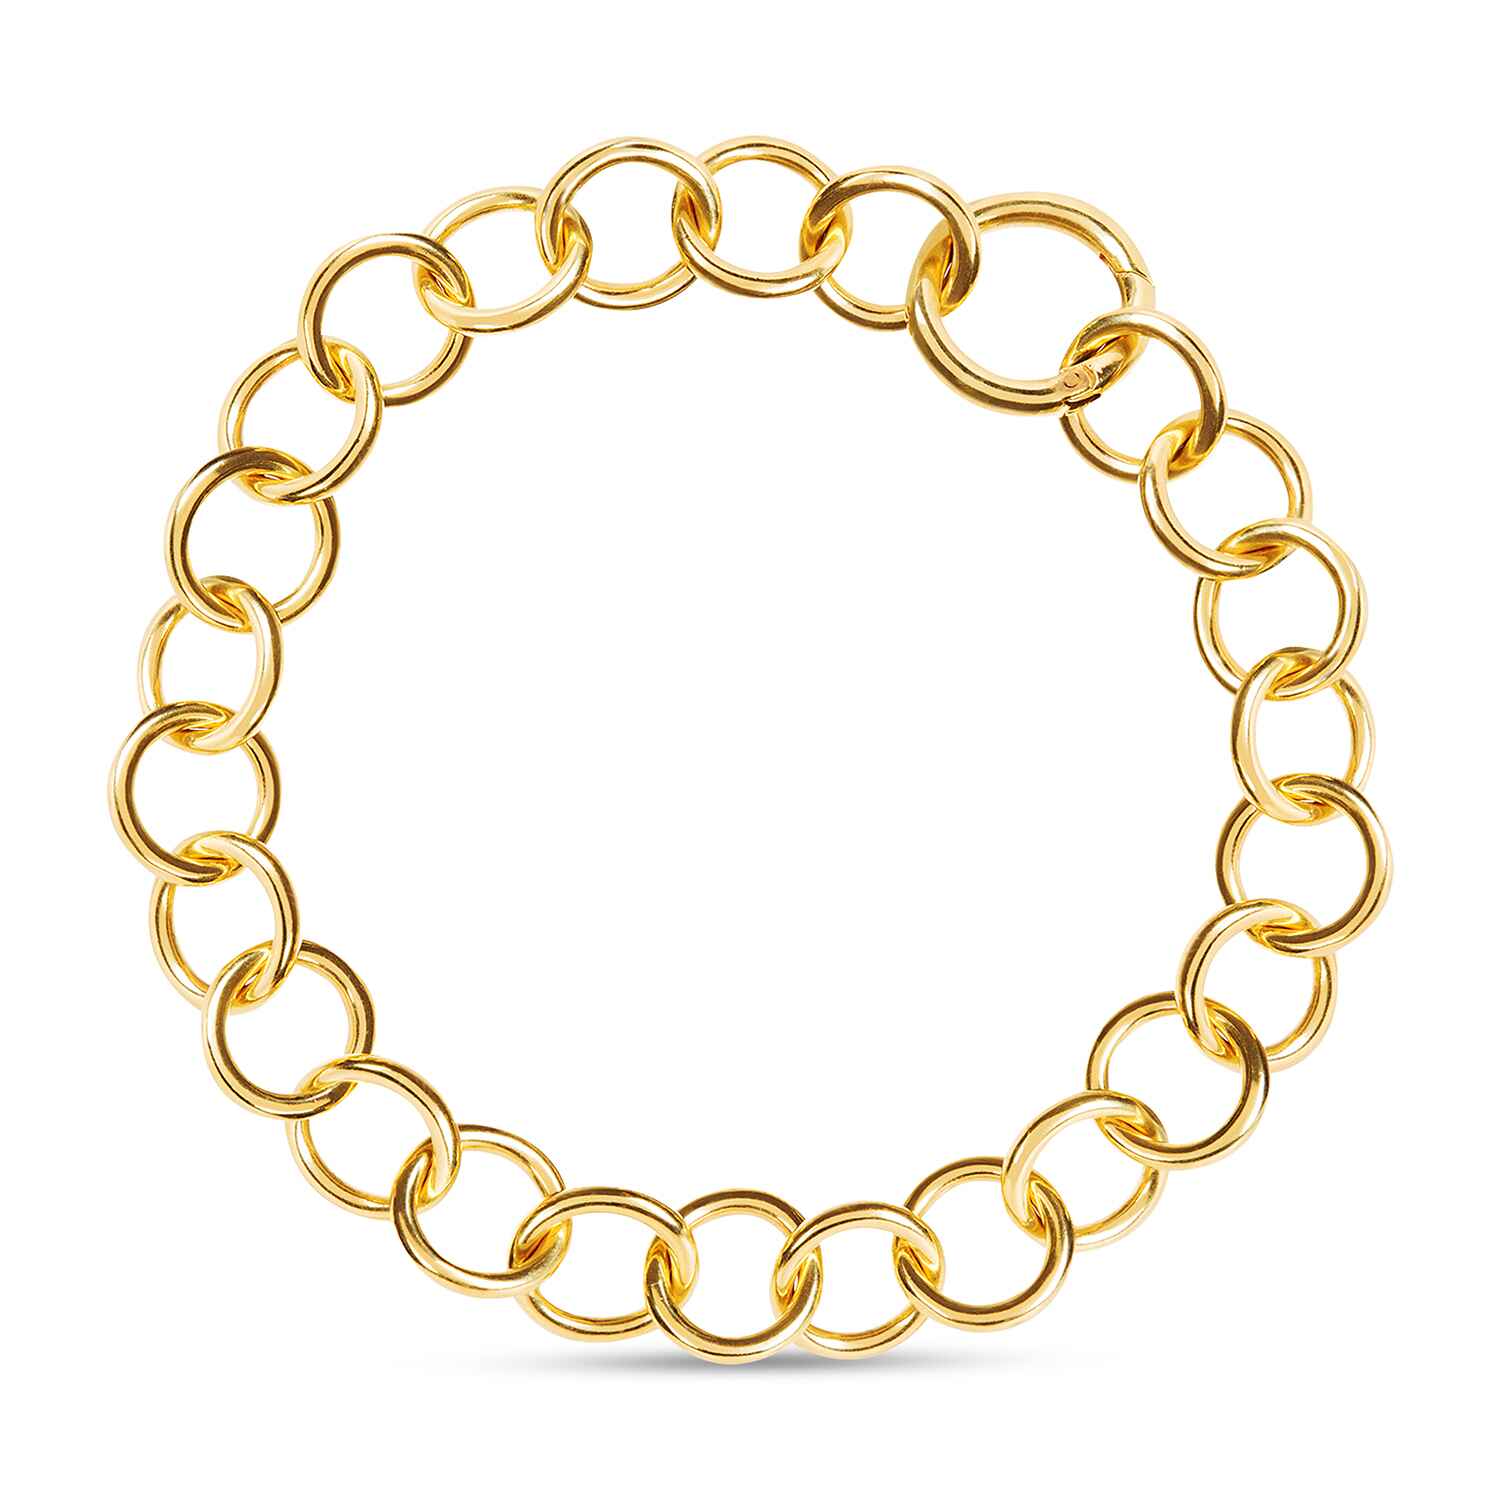 The Daphne Thick Gold Chain Choker Necklace in sustainable gold vermeil includes two clasps. This luxurious design gleams with the hand-polished gold and can also be worn around your wrist as a double bracelet.